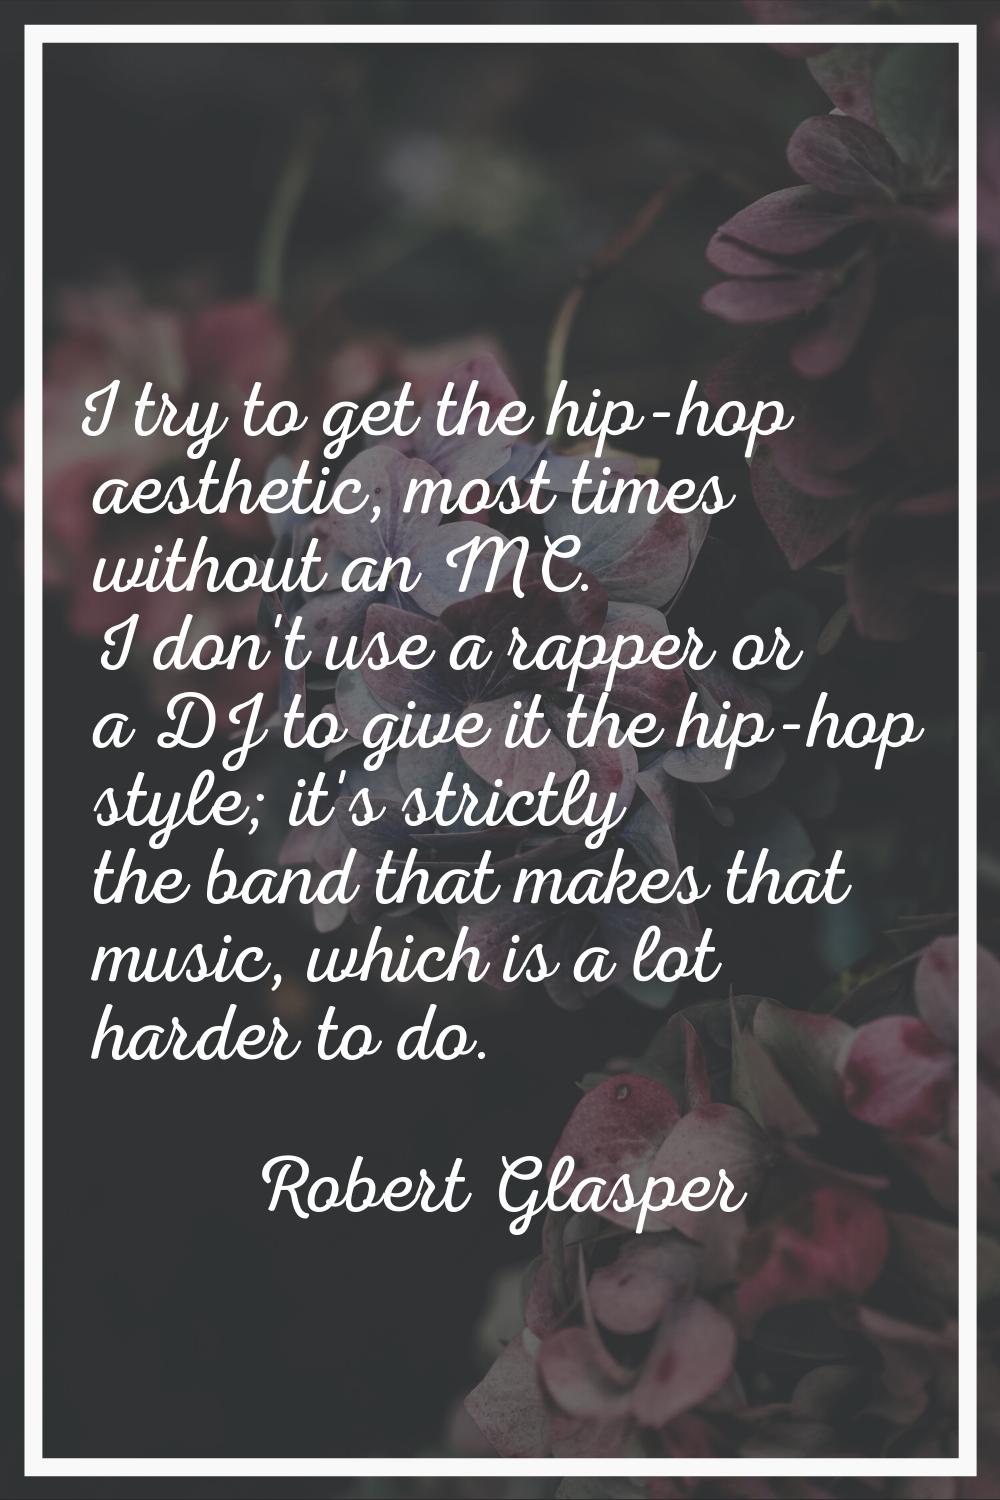 I try to get the hip-hop aesthetic, most times without an MC. I don't use a rapper or a DJ to give 